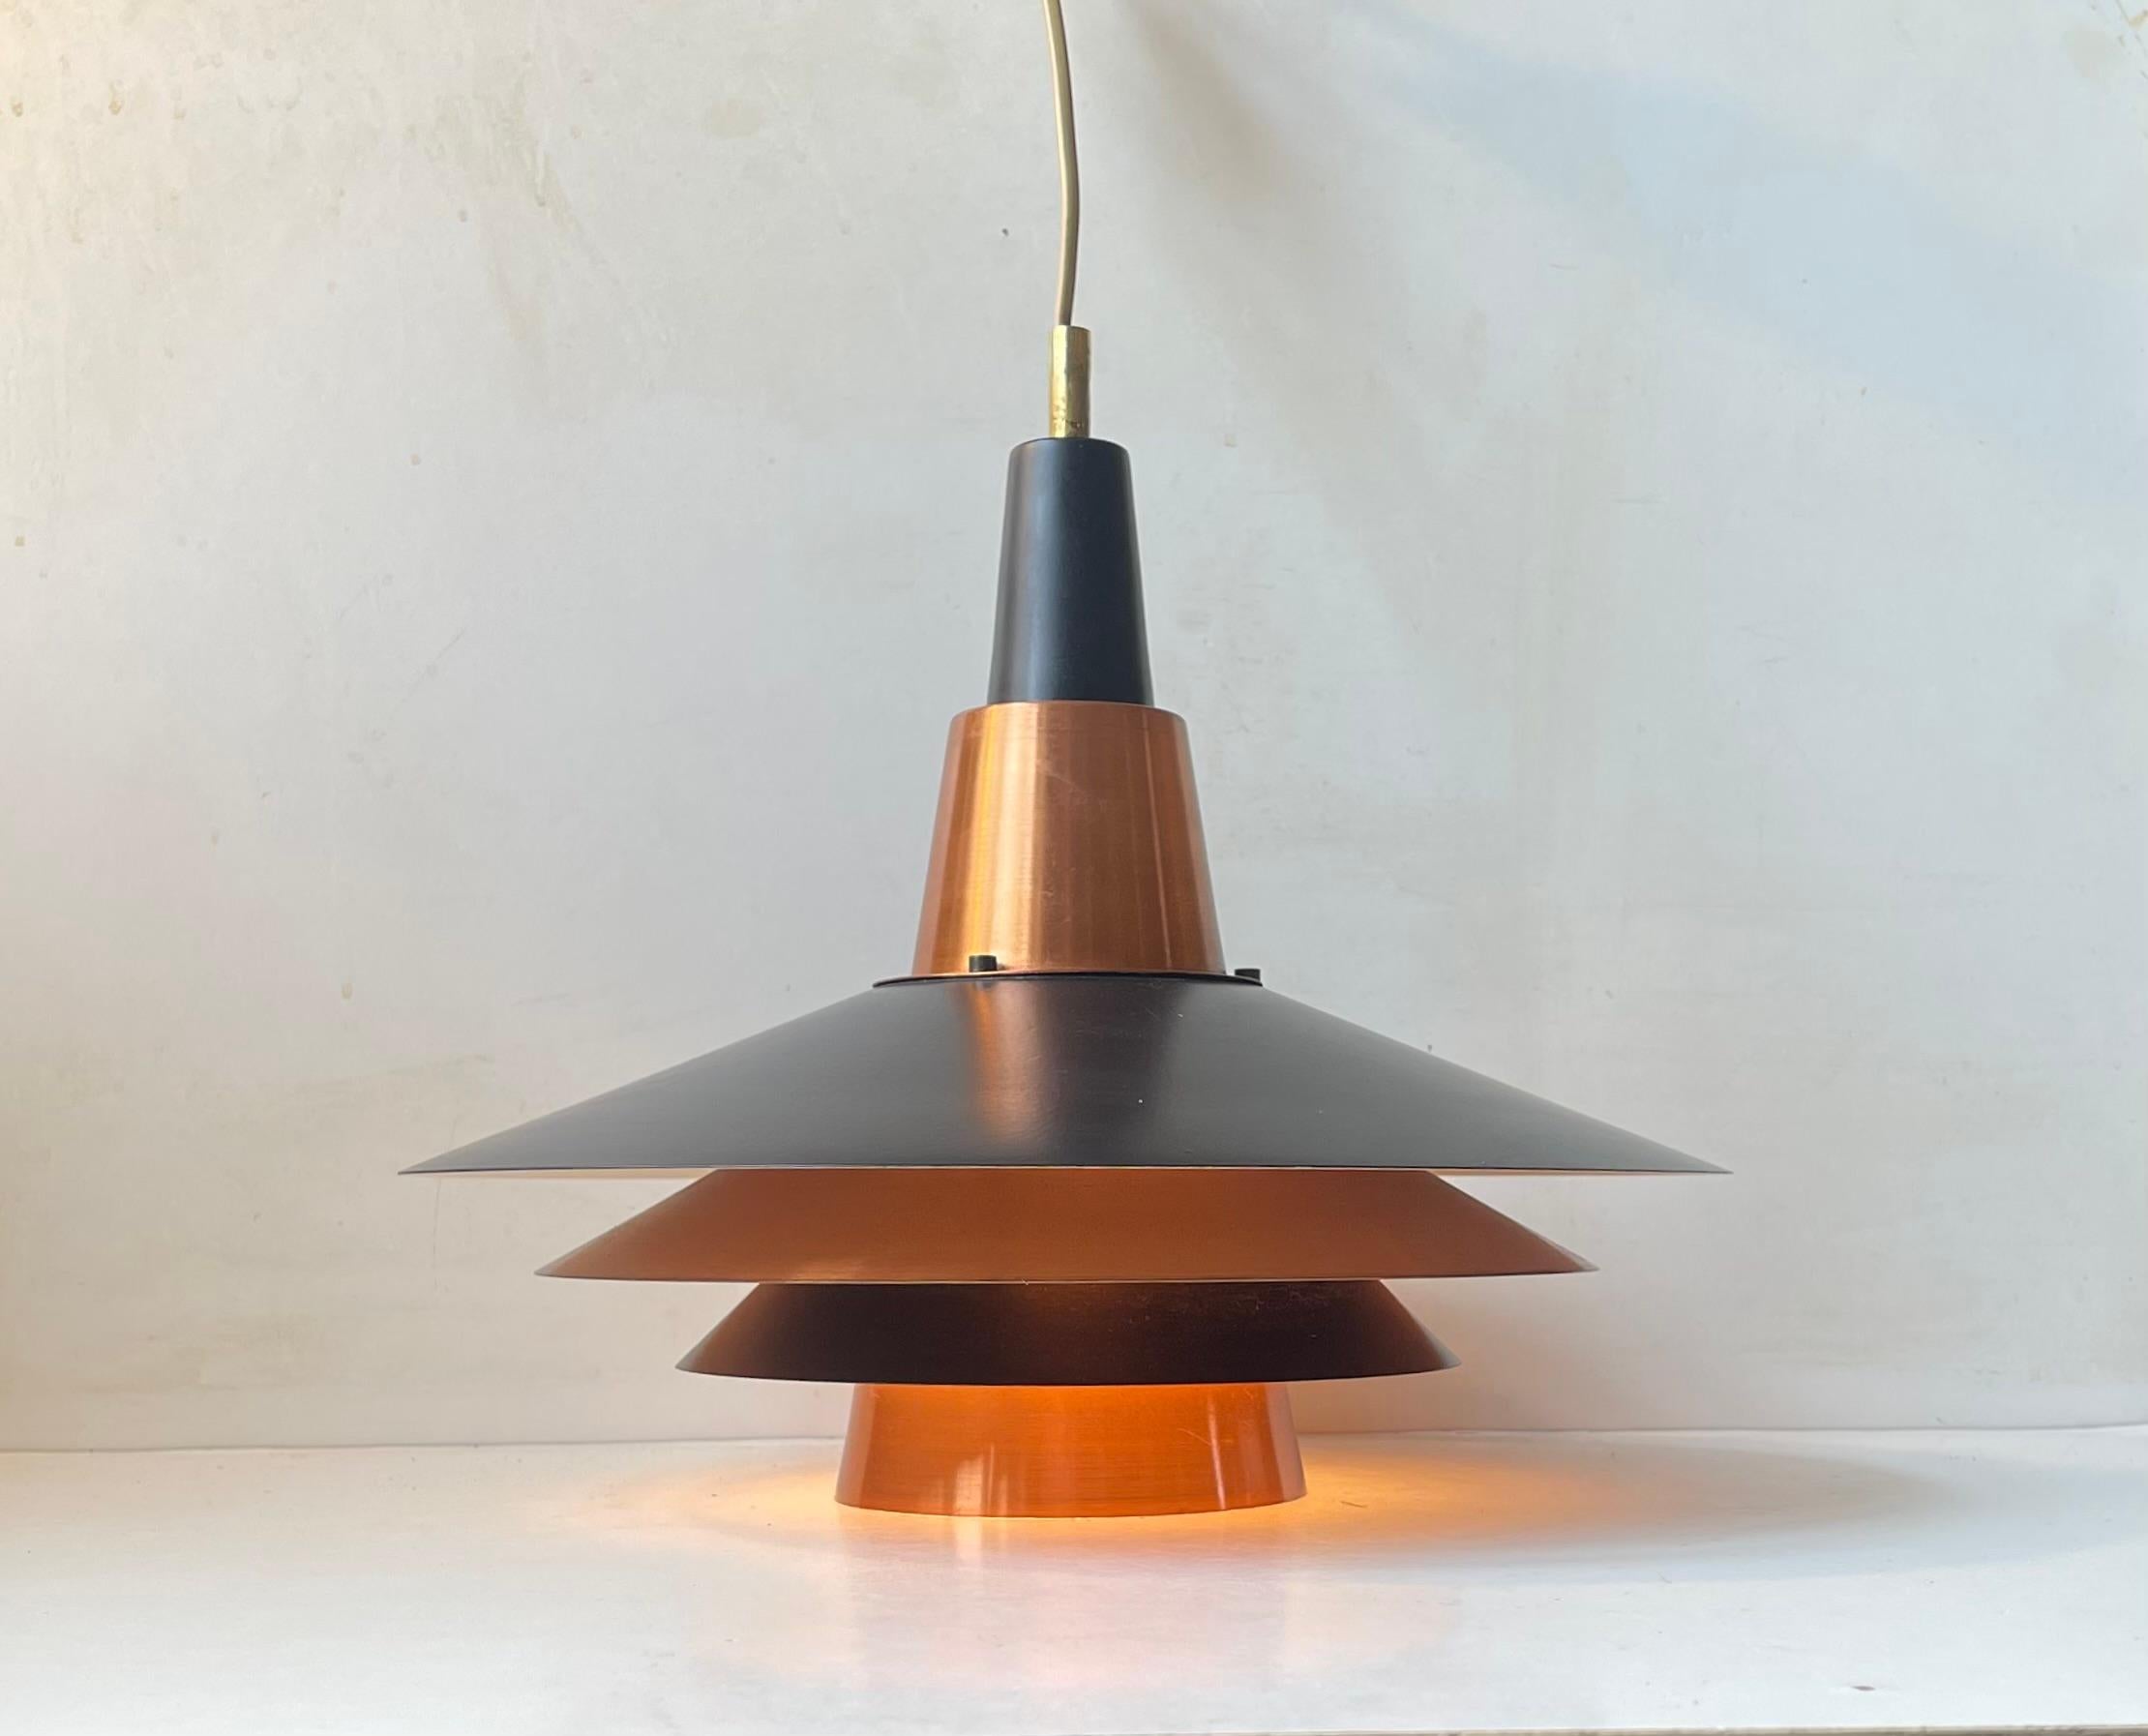 Mid-20th Century Scandinavian Modern Copper Ceiling Lamp by Ernest Voss, 1950s For Sale